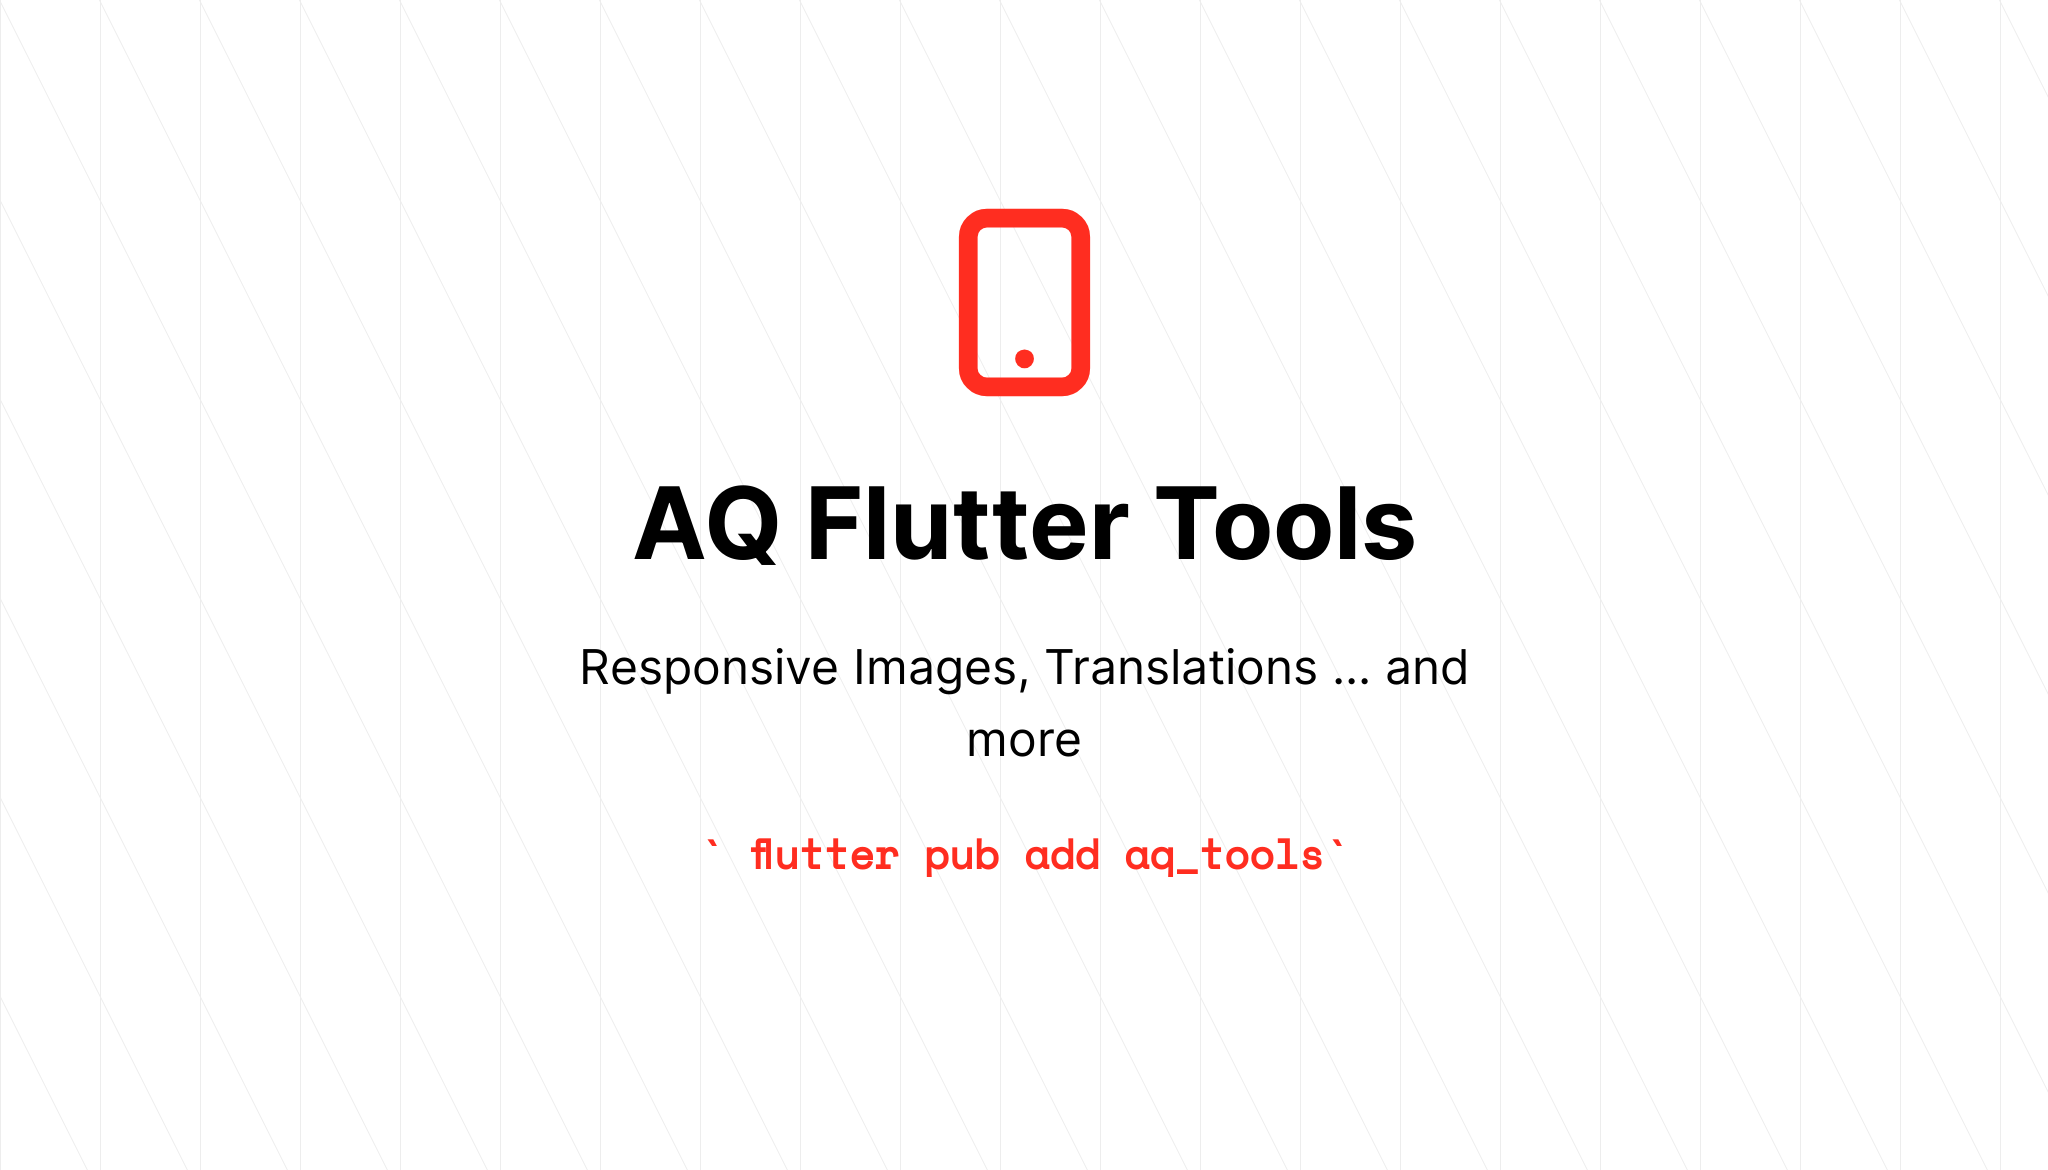 AQ flutter tools - Responsive Images, Translations and more